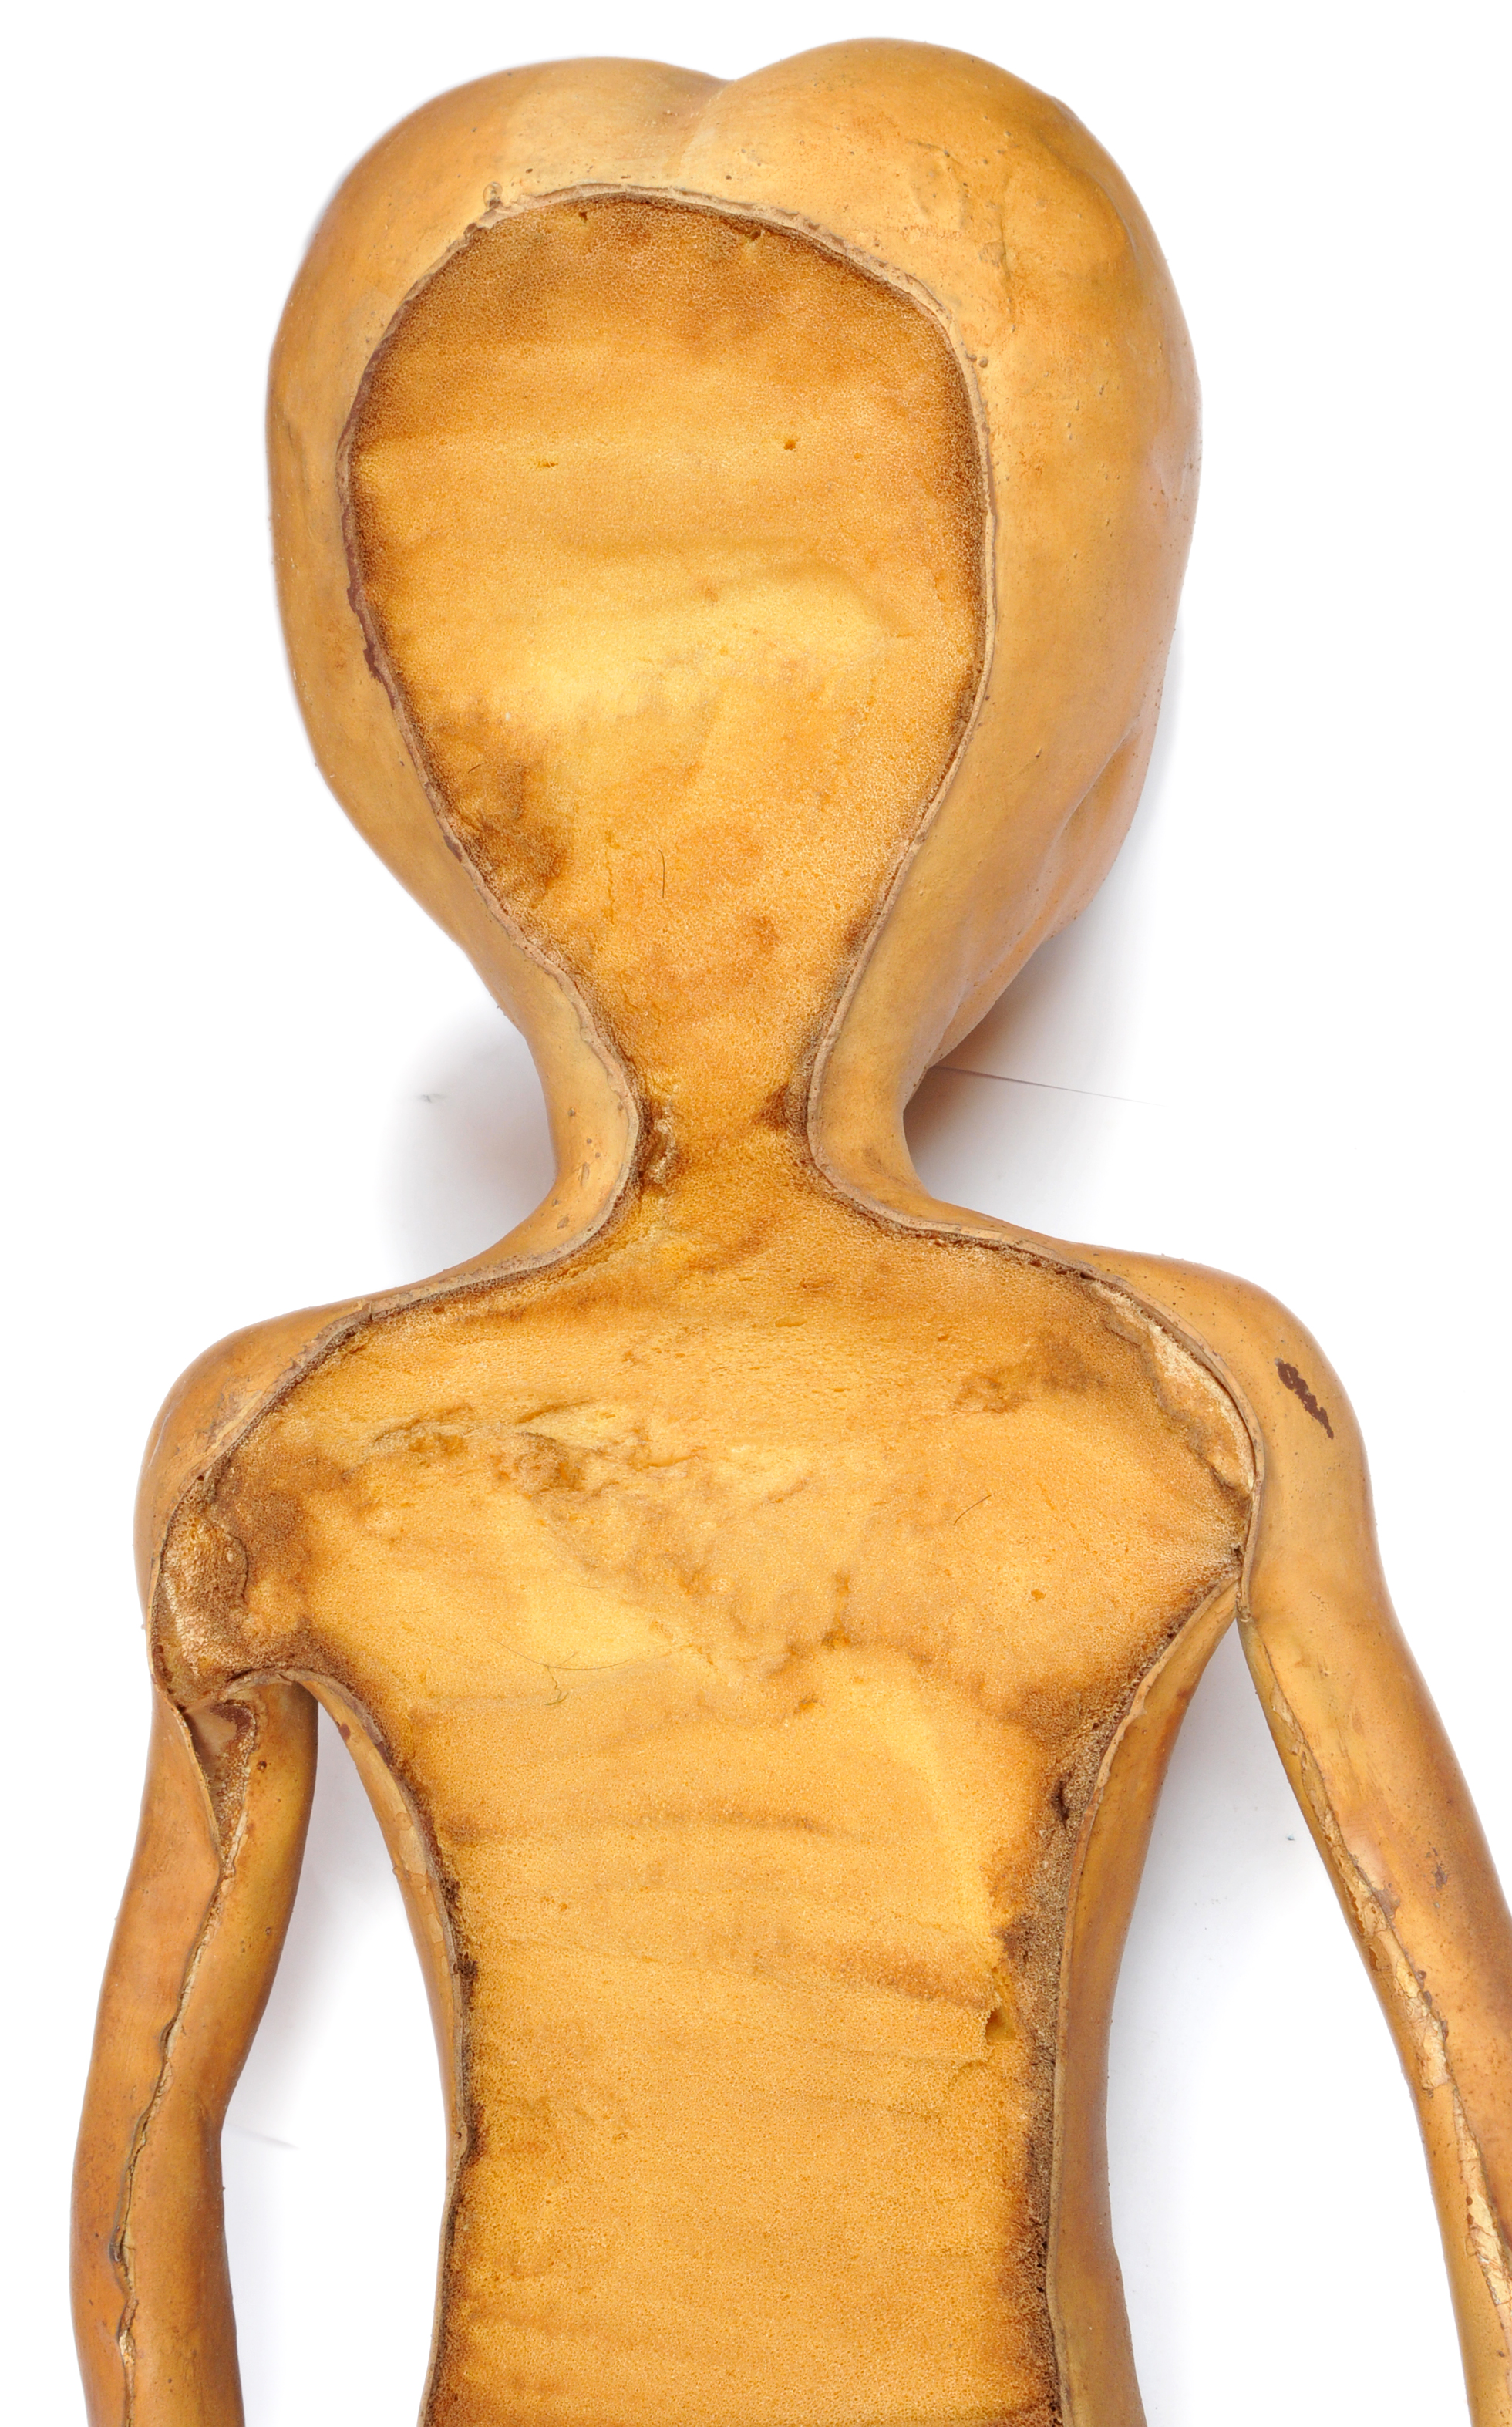 Life Size Alien Prop Used in The X-Files 1993 to 2016 - Image 6 of 8